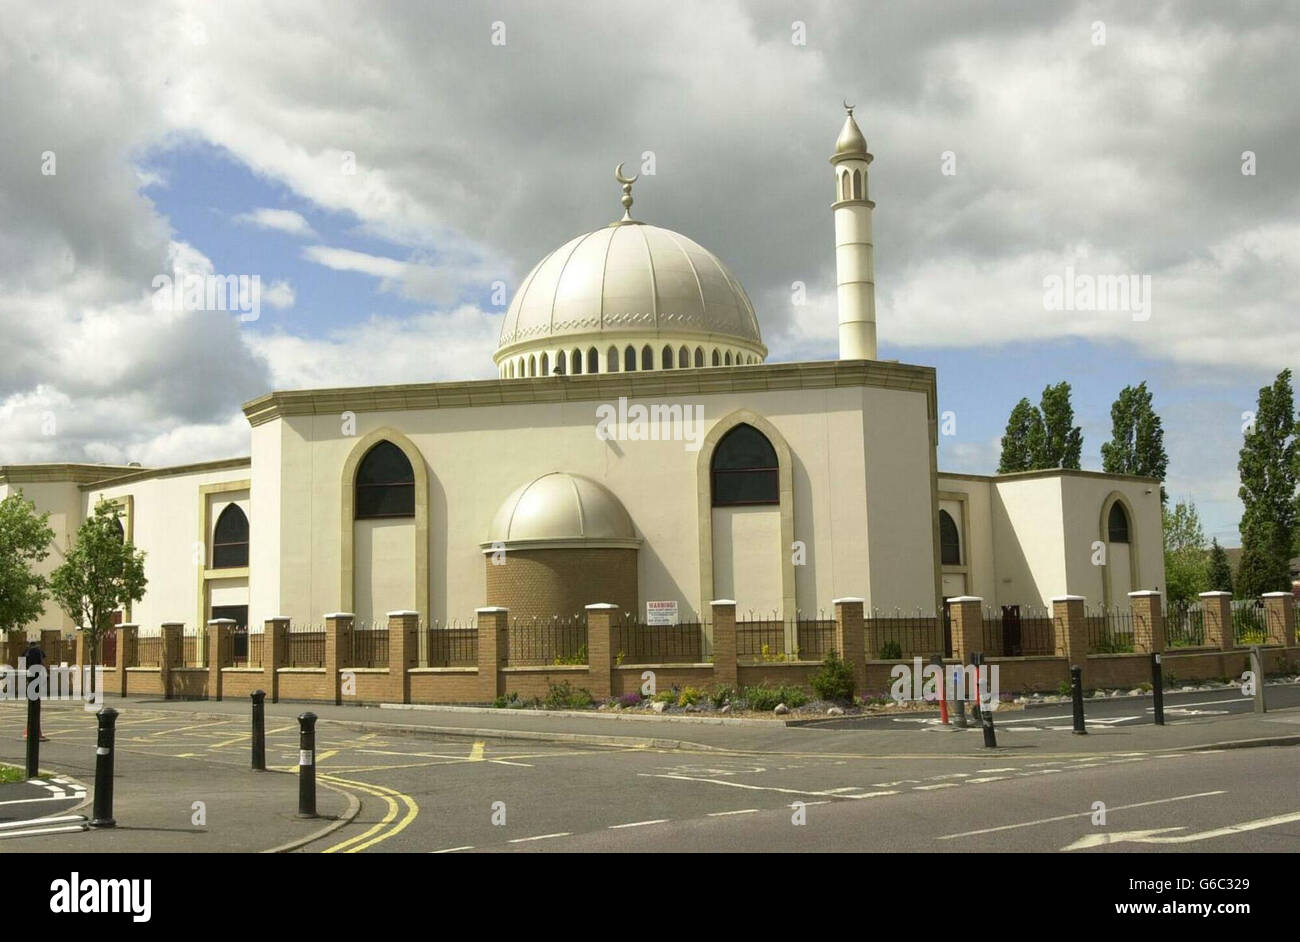 The Hounslow Jamia Mosque, London, which was attented by suicide bomber Asif Mohammed Hanif . Police in Tel Aviv say Hanif, 21, blew himself up hours before the publication of the road map outlining a peaceful settlement in the Middle East. *..Three people died in the attack and more than 50 were injured. Suleman Chachia, chair of the Jamia Mosque, said Hanif was a regular worshipper and had been attending prayers for at least the last two years. Stock Photo